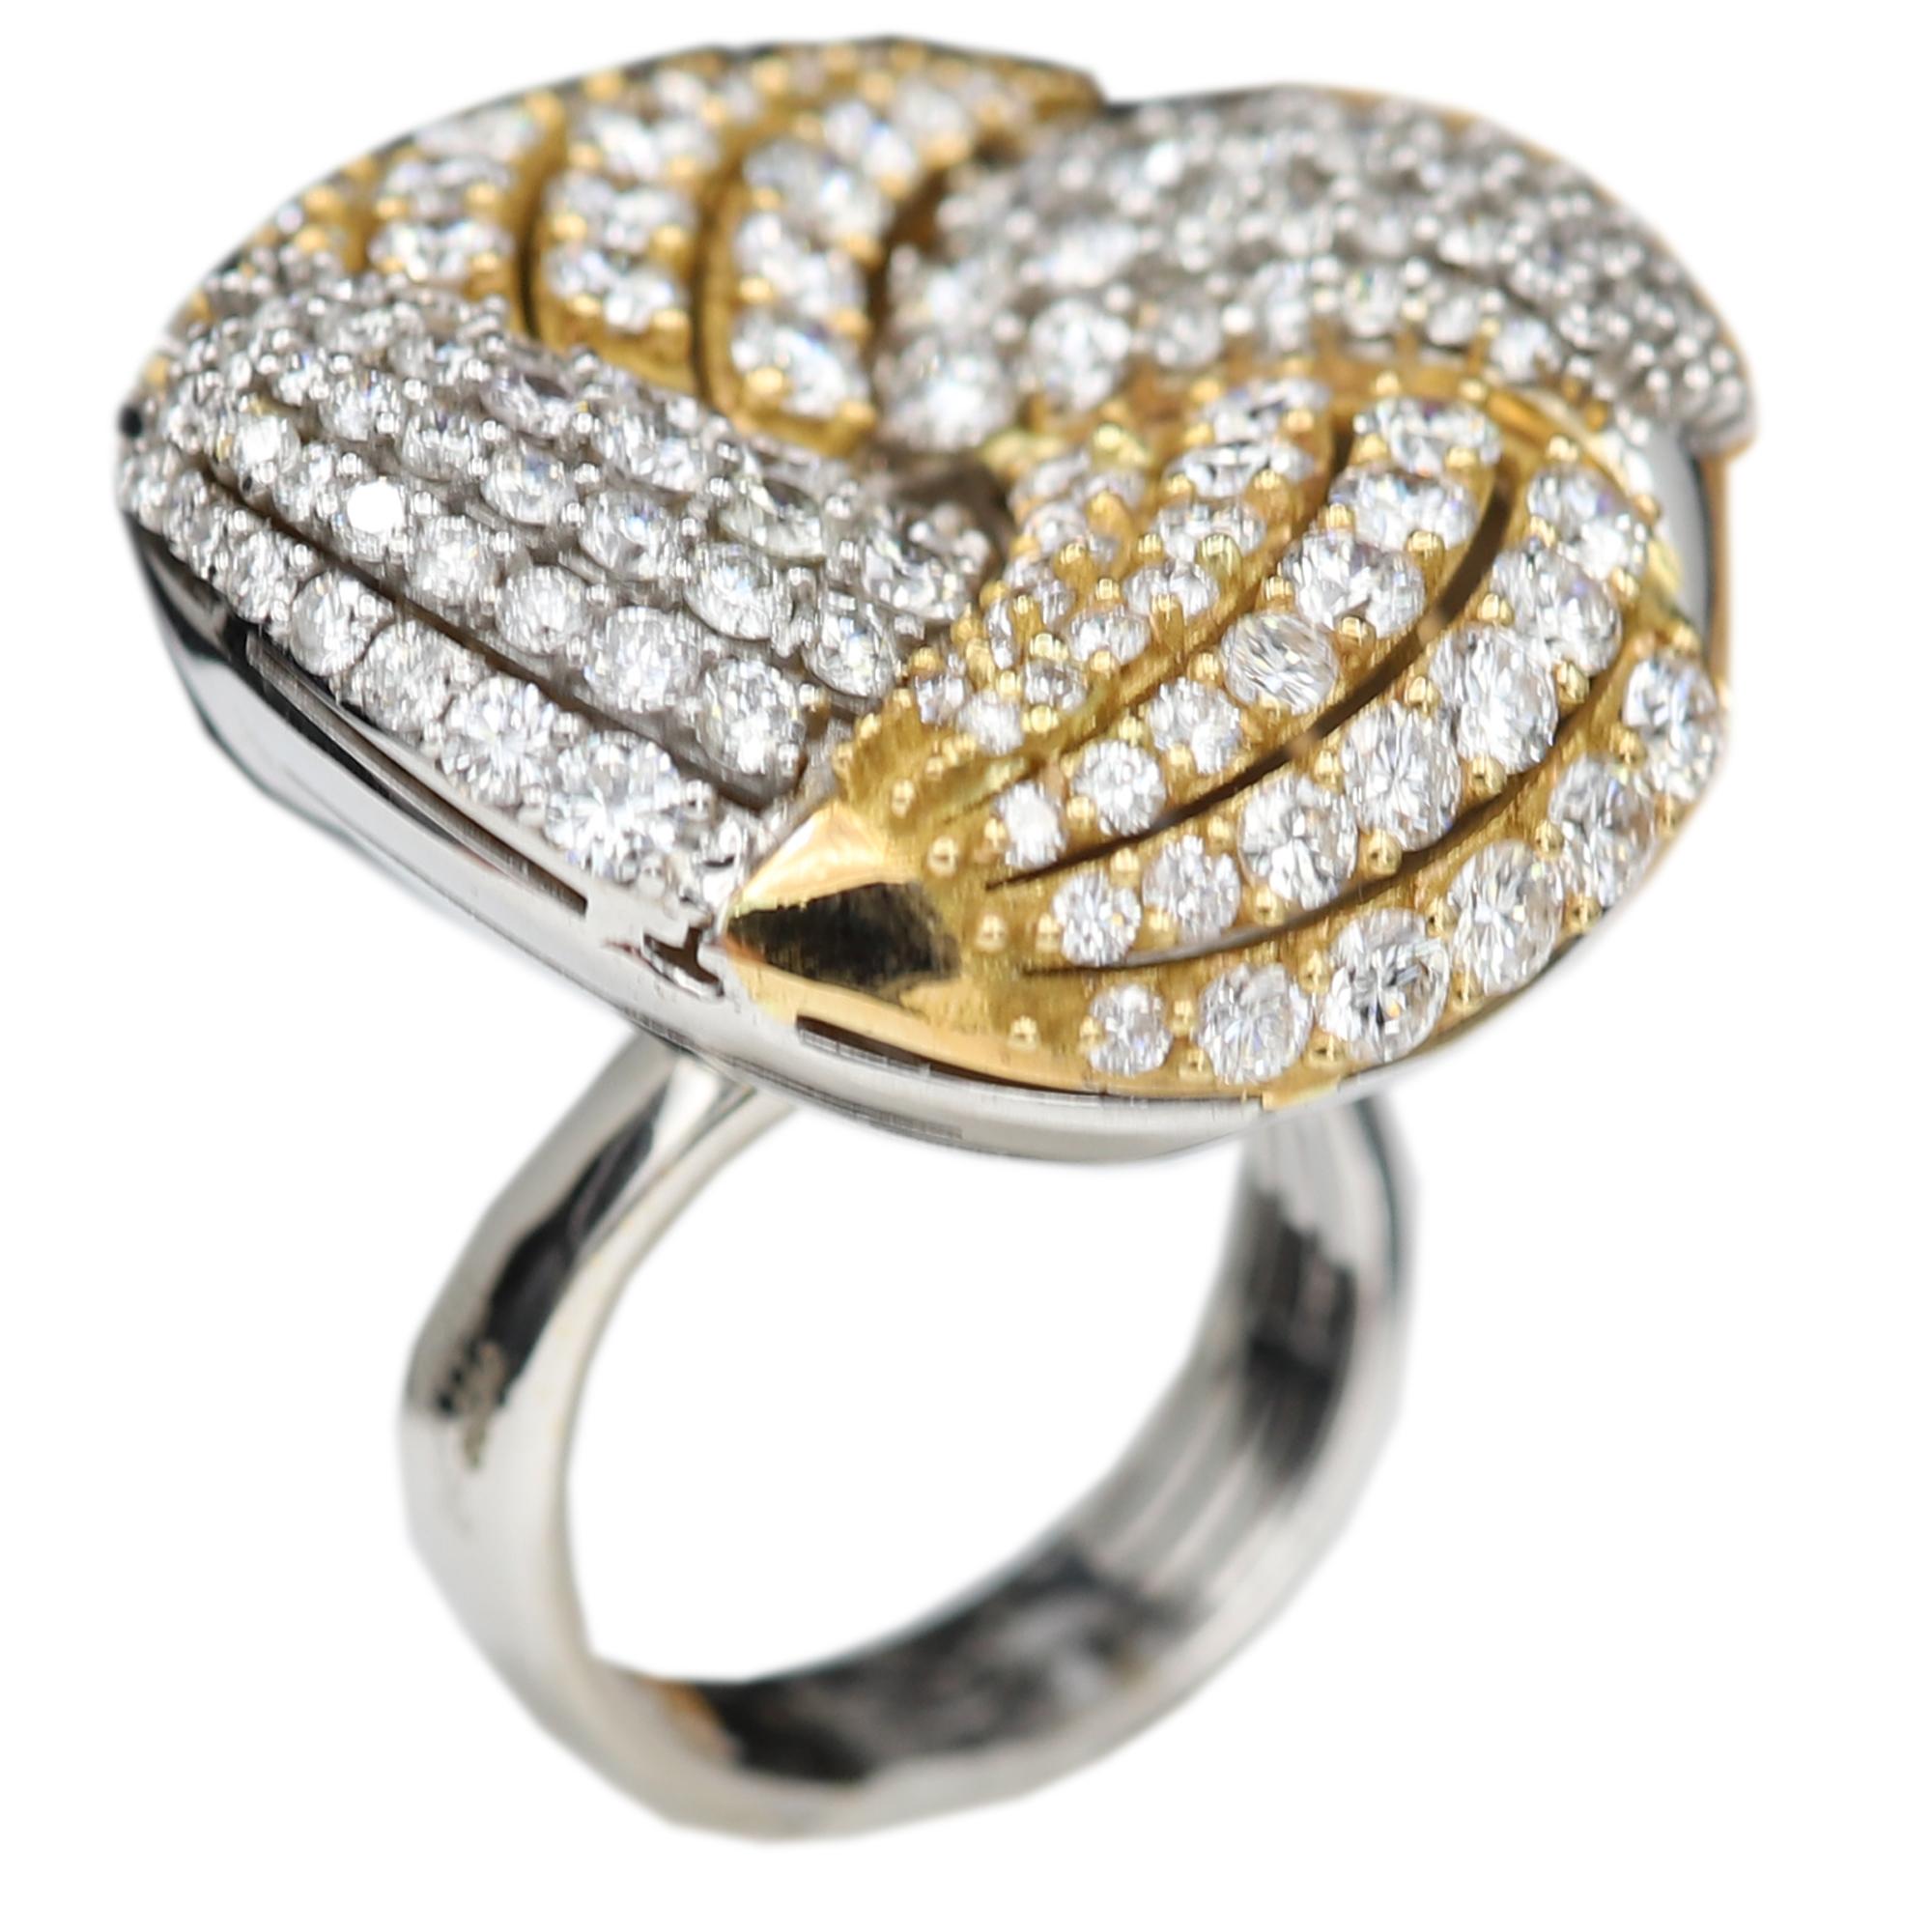 Bold, Large and very Statement Ring.
18k White & Yellow Gold 16 grams.
Total Diamonds 5.22 carat G-VS.
Finger size 7
Design Size- approx 30 Diameter.
